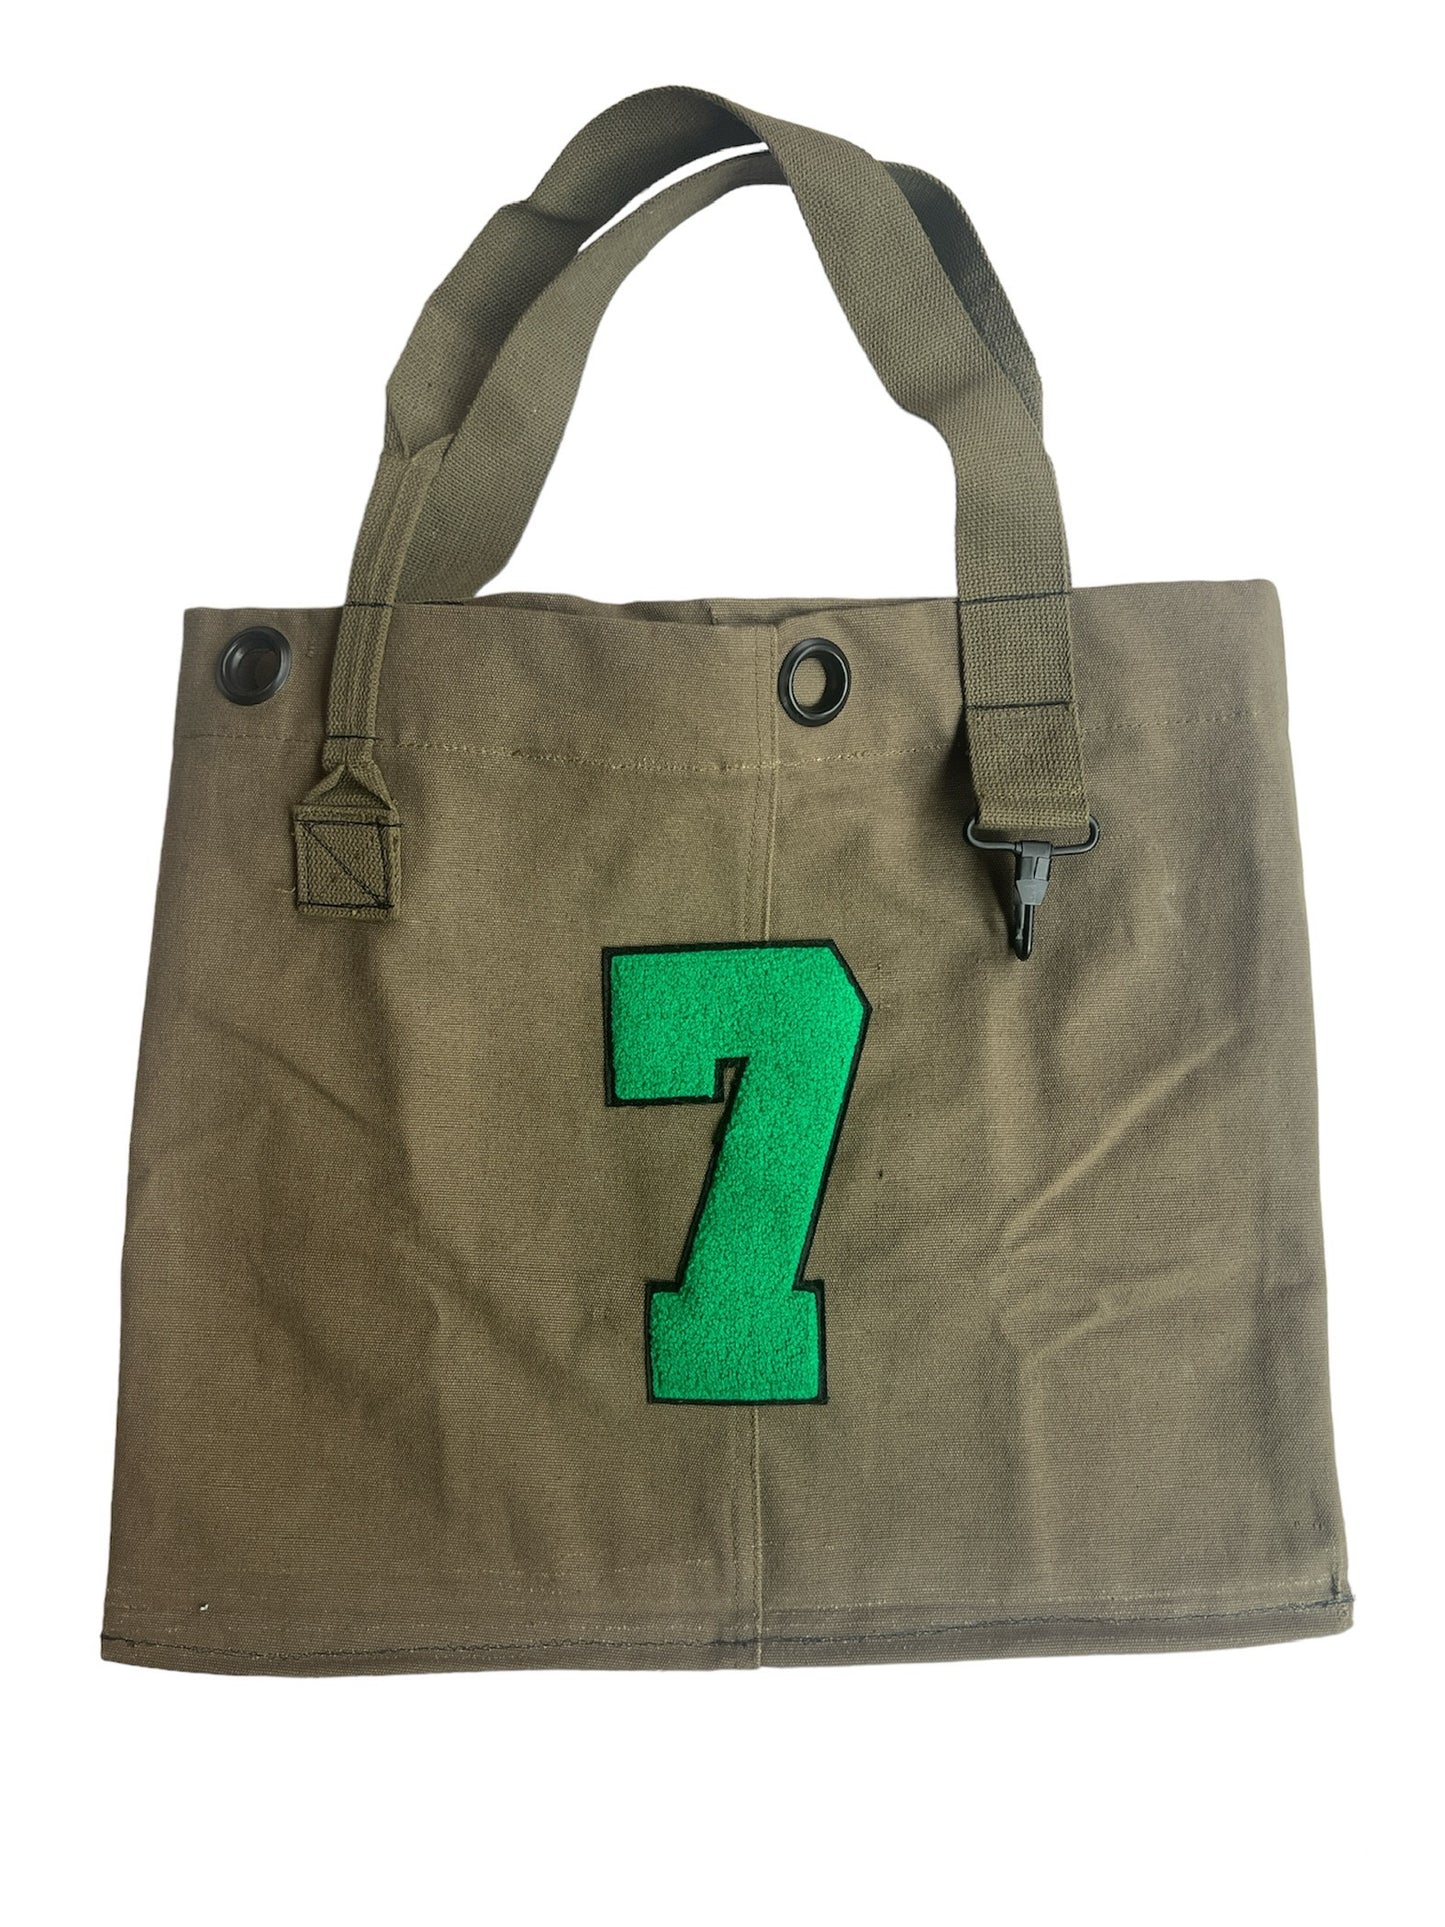 Distressed Tote with Leather Hand Strap